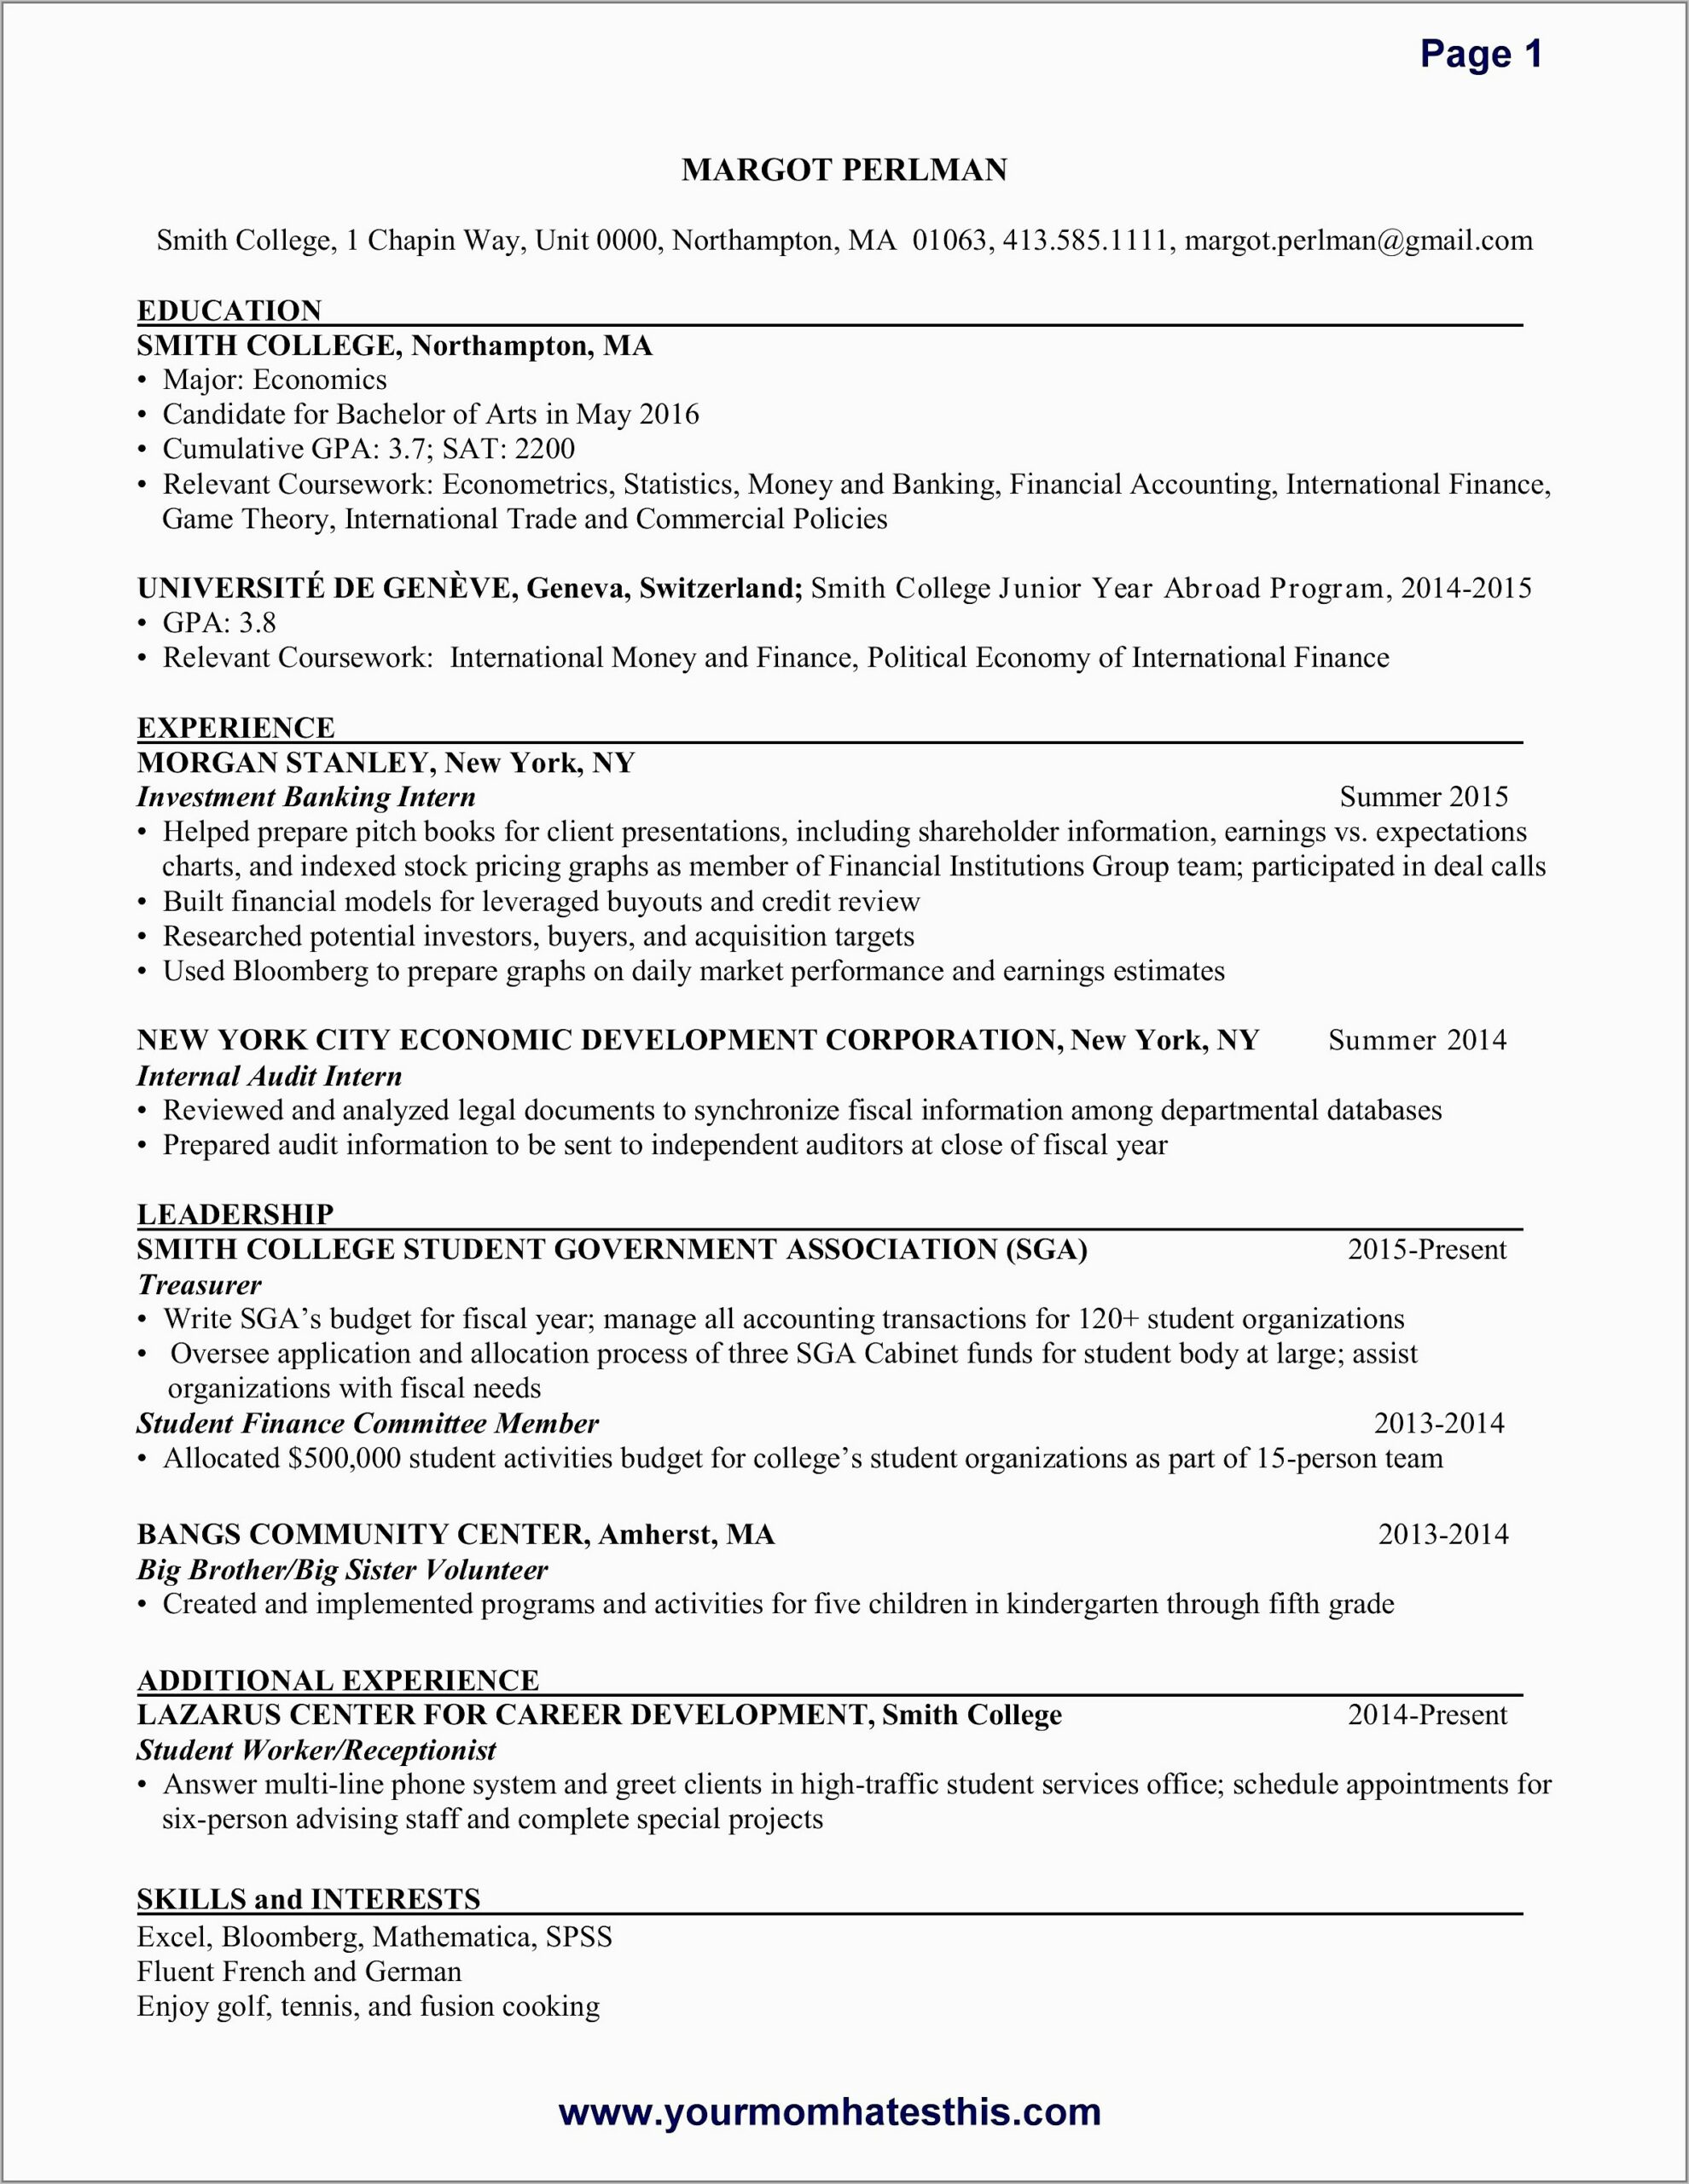 Sample Curriculum Vitae For Bankers